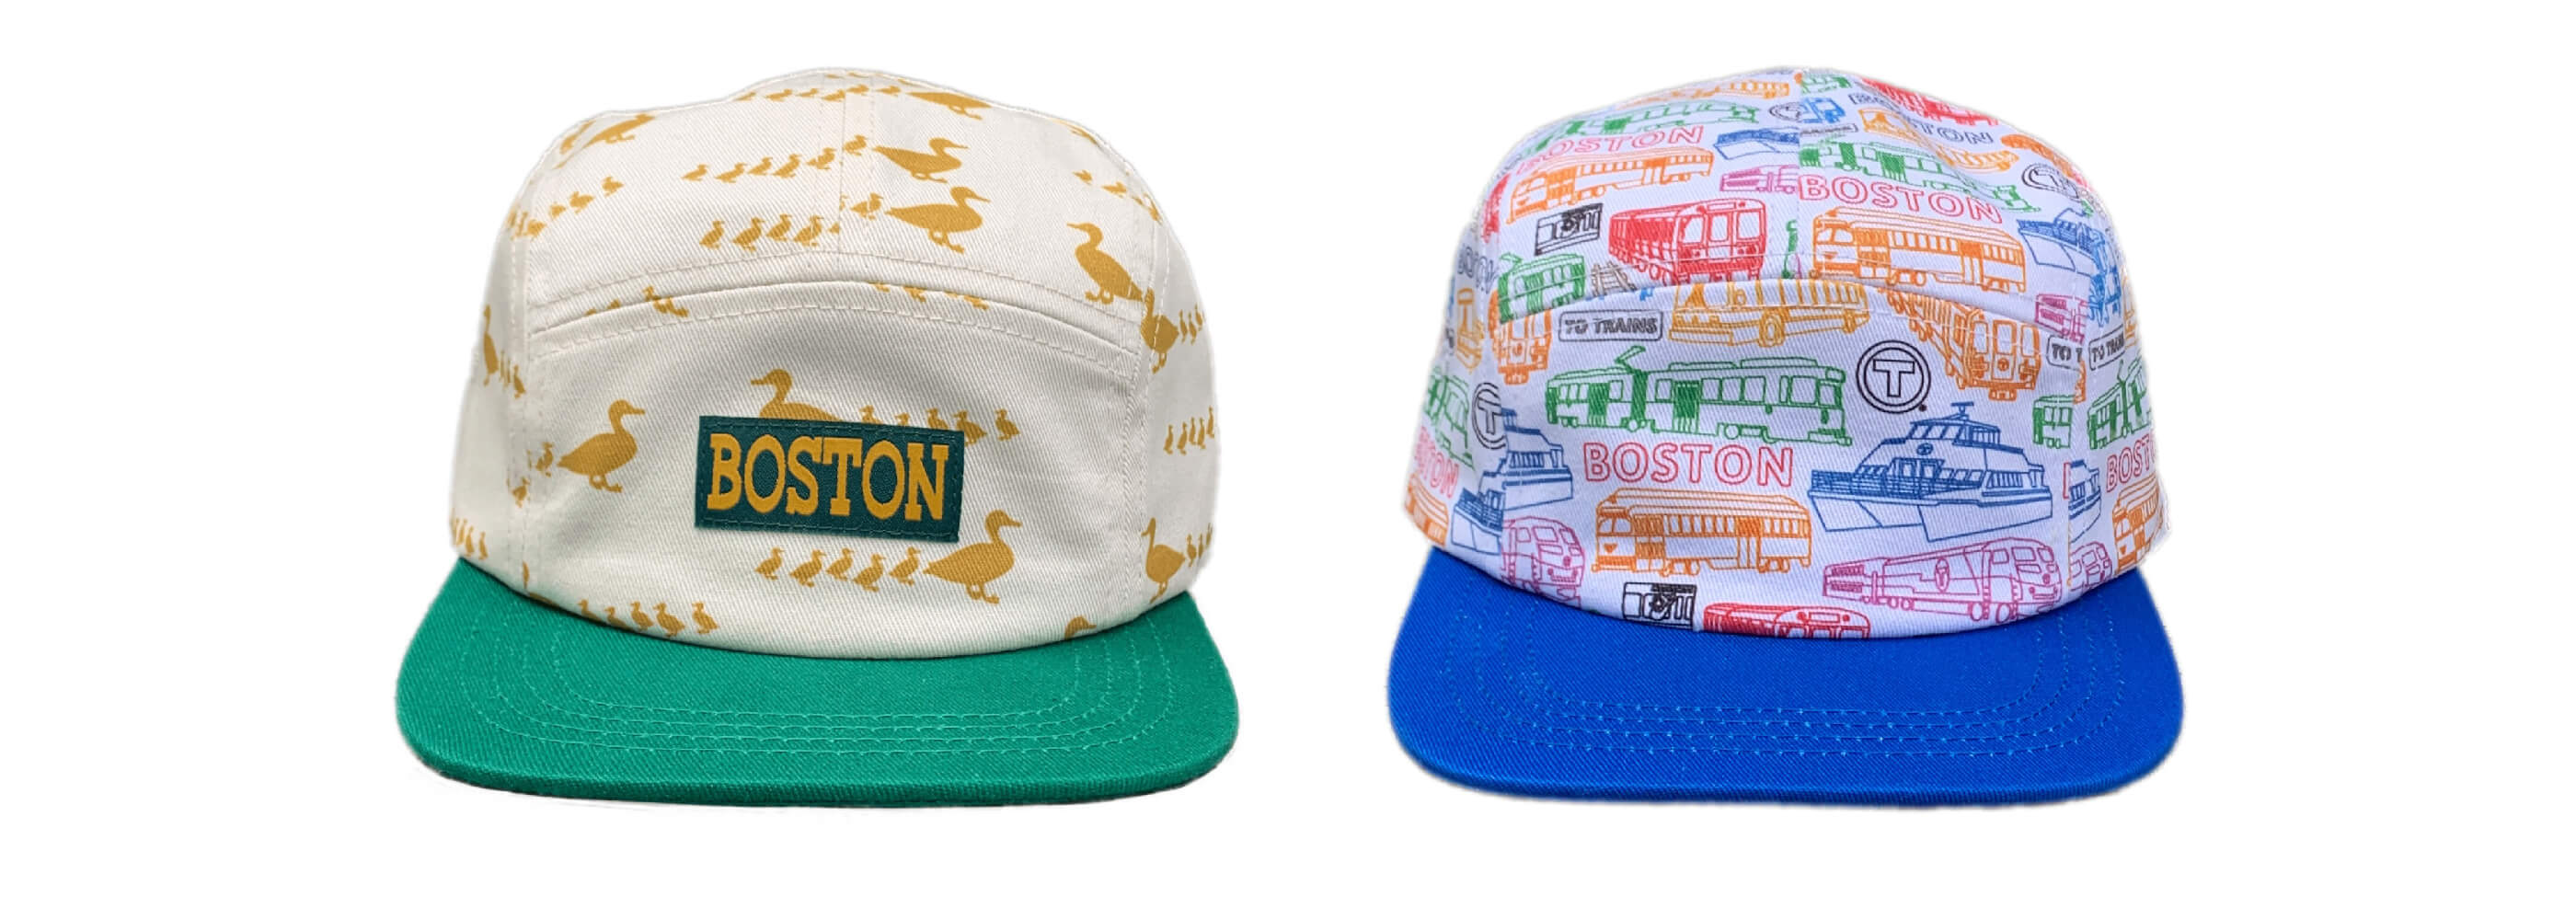 Unique Boston Baseball Hats for Toddlers